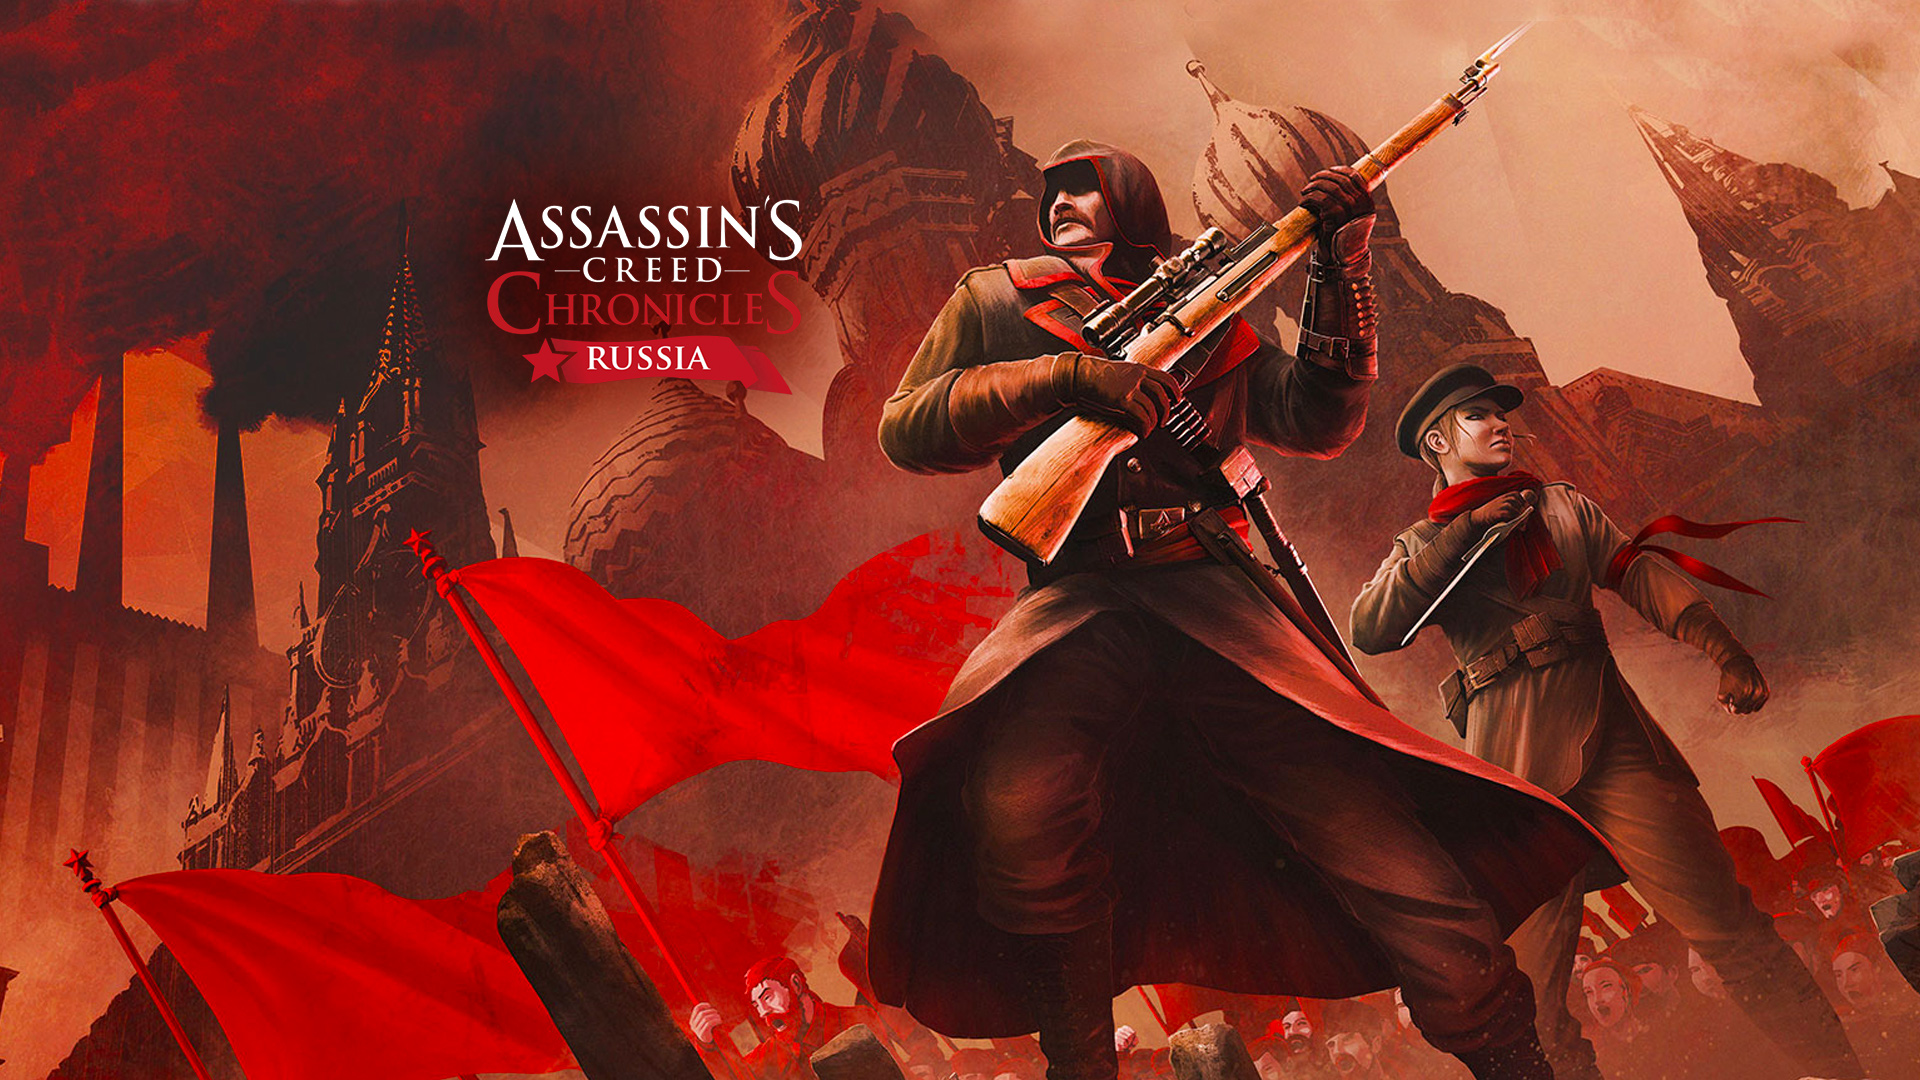 Assassin's Creed Chronicles: Russia Review - GameSpot